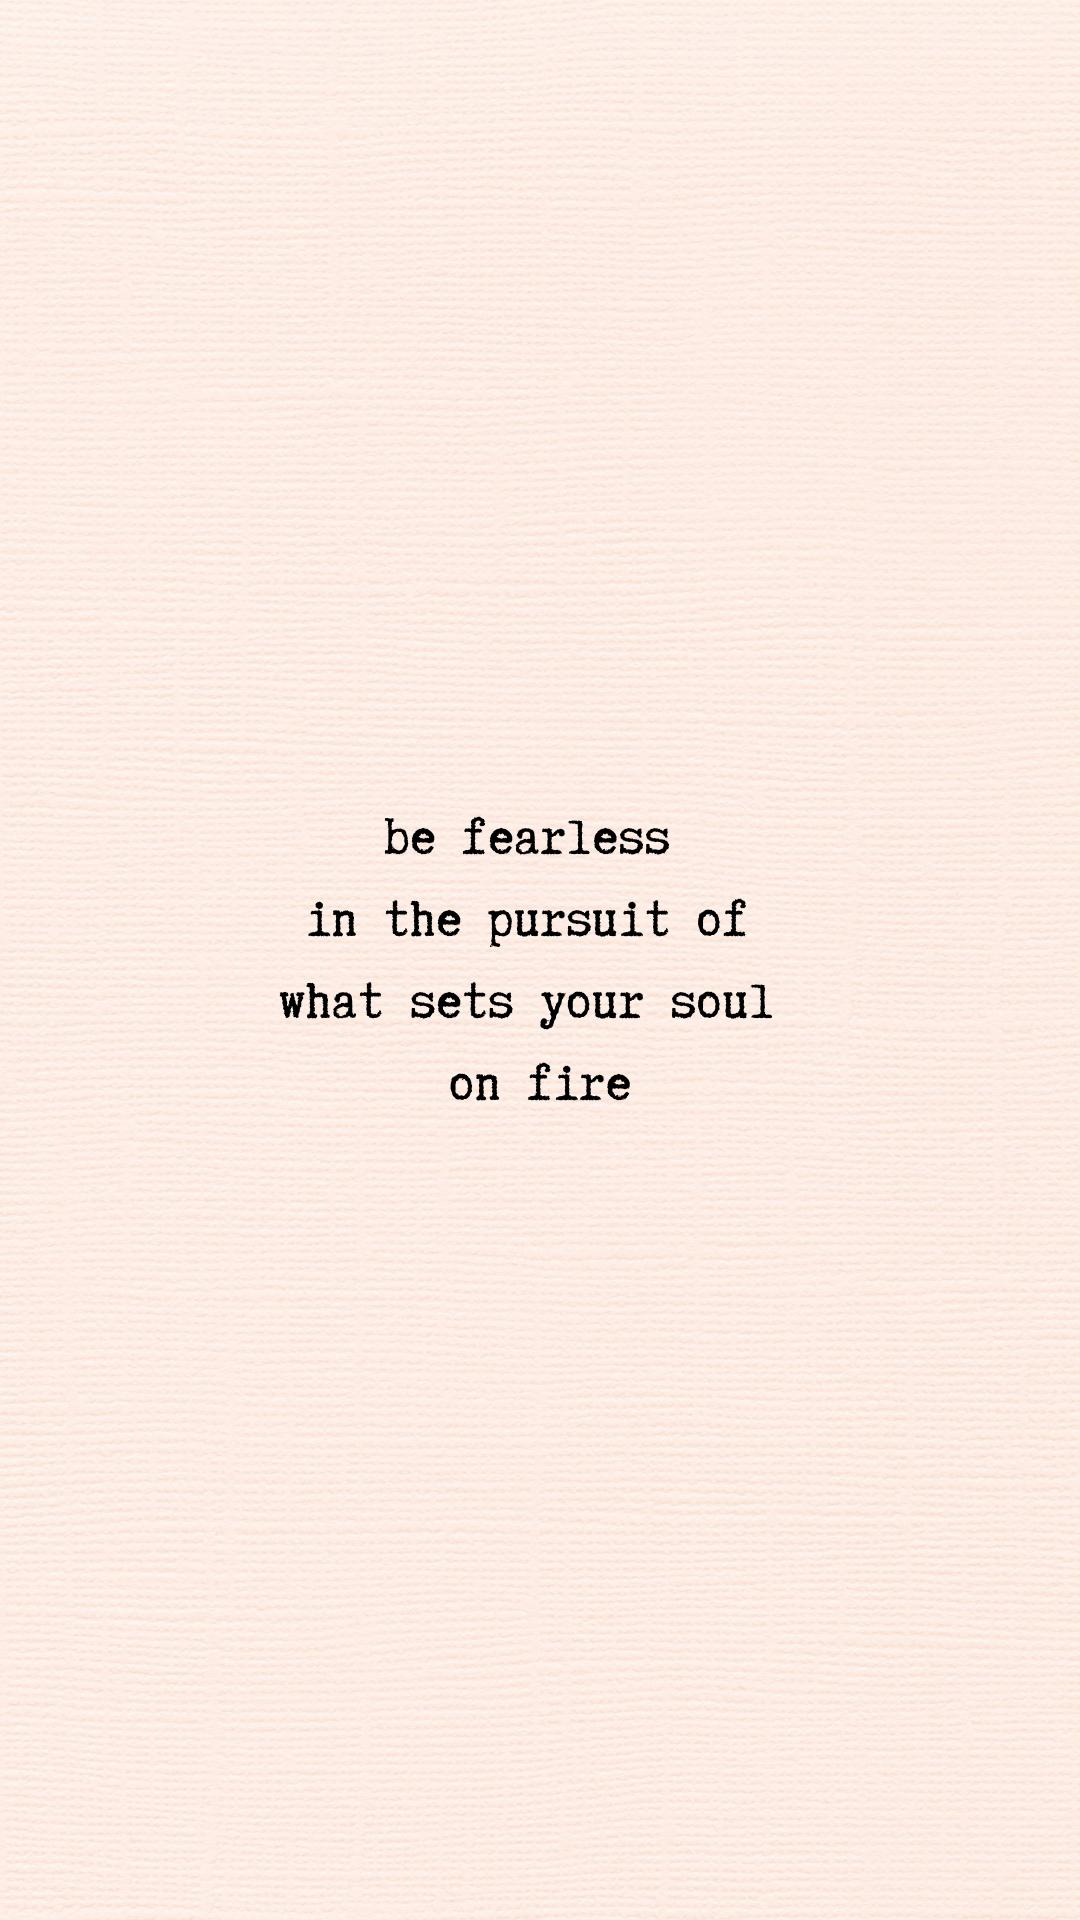 Be fearless in the pursuit of what sets your soul on fire - Motivational, inspirational